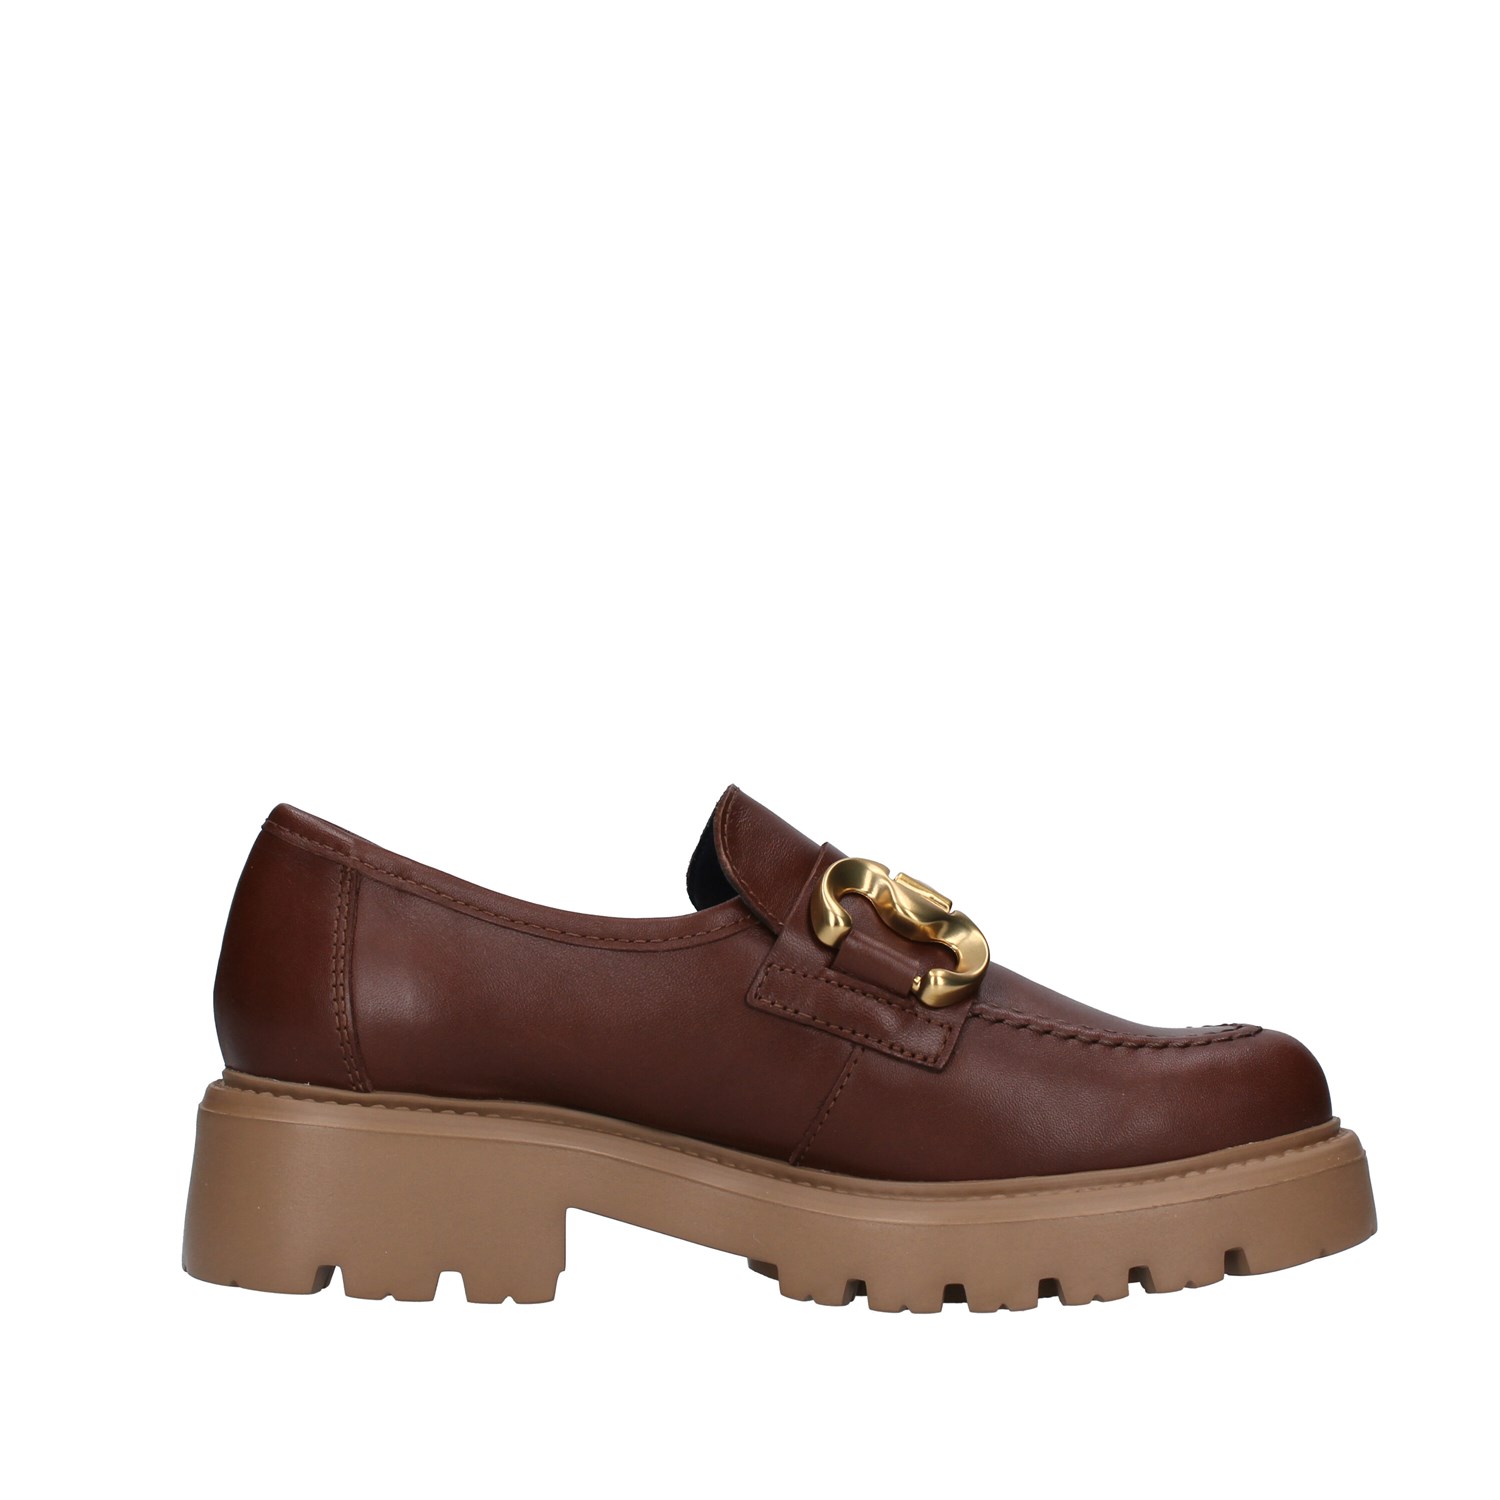 Callaghan 32900 BROWN Shoes Woman